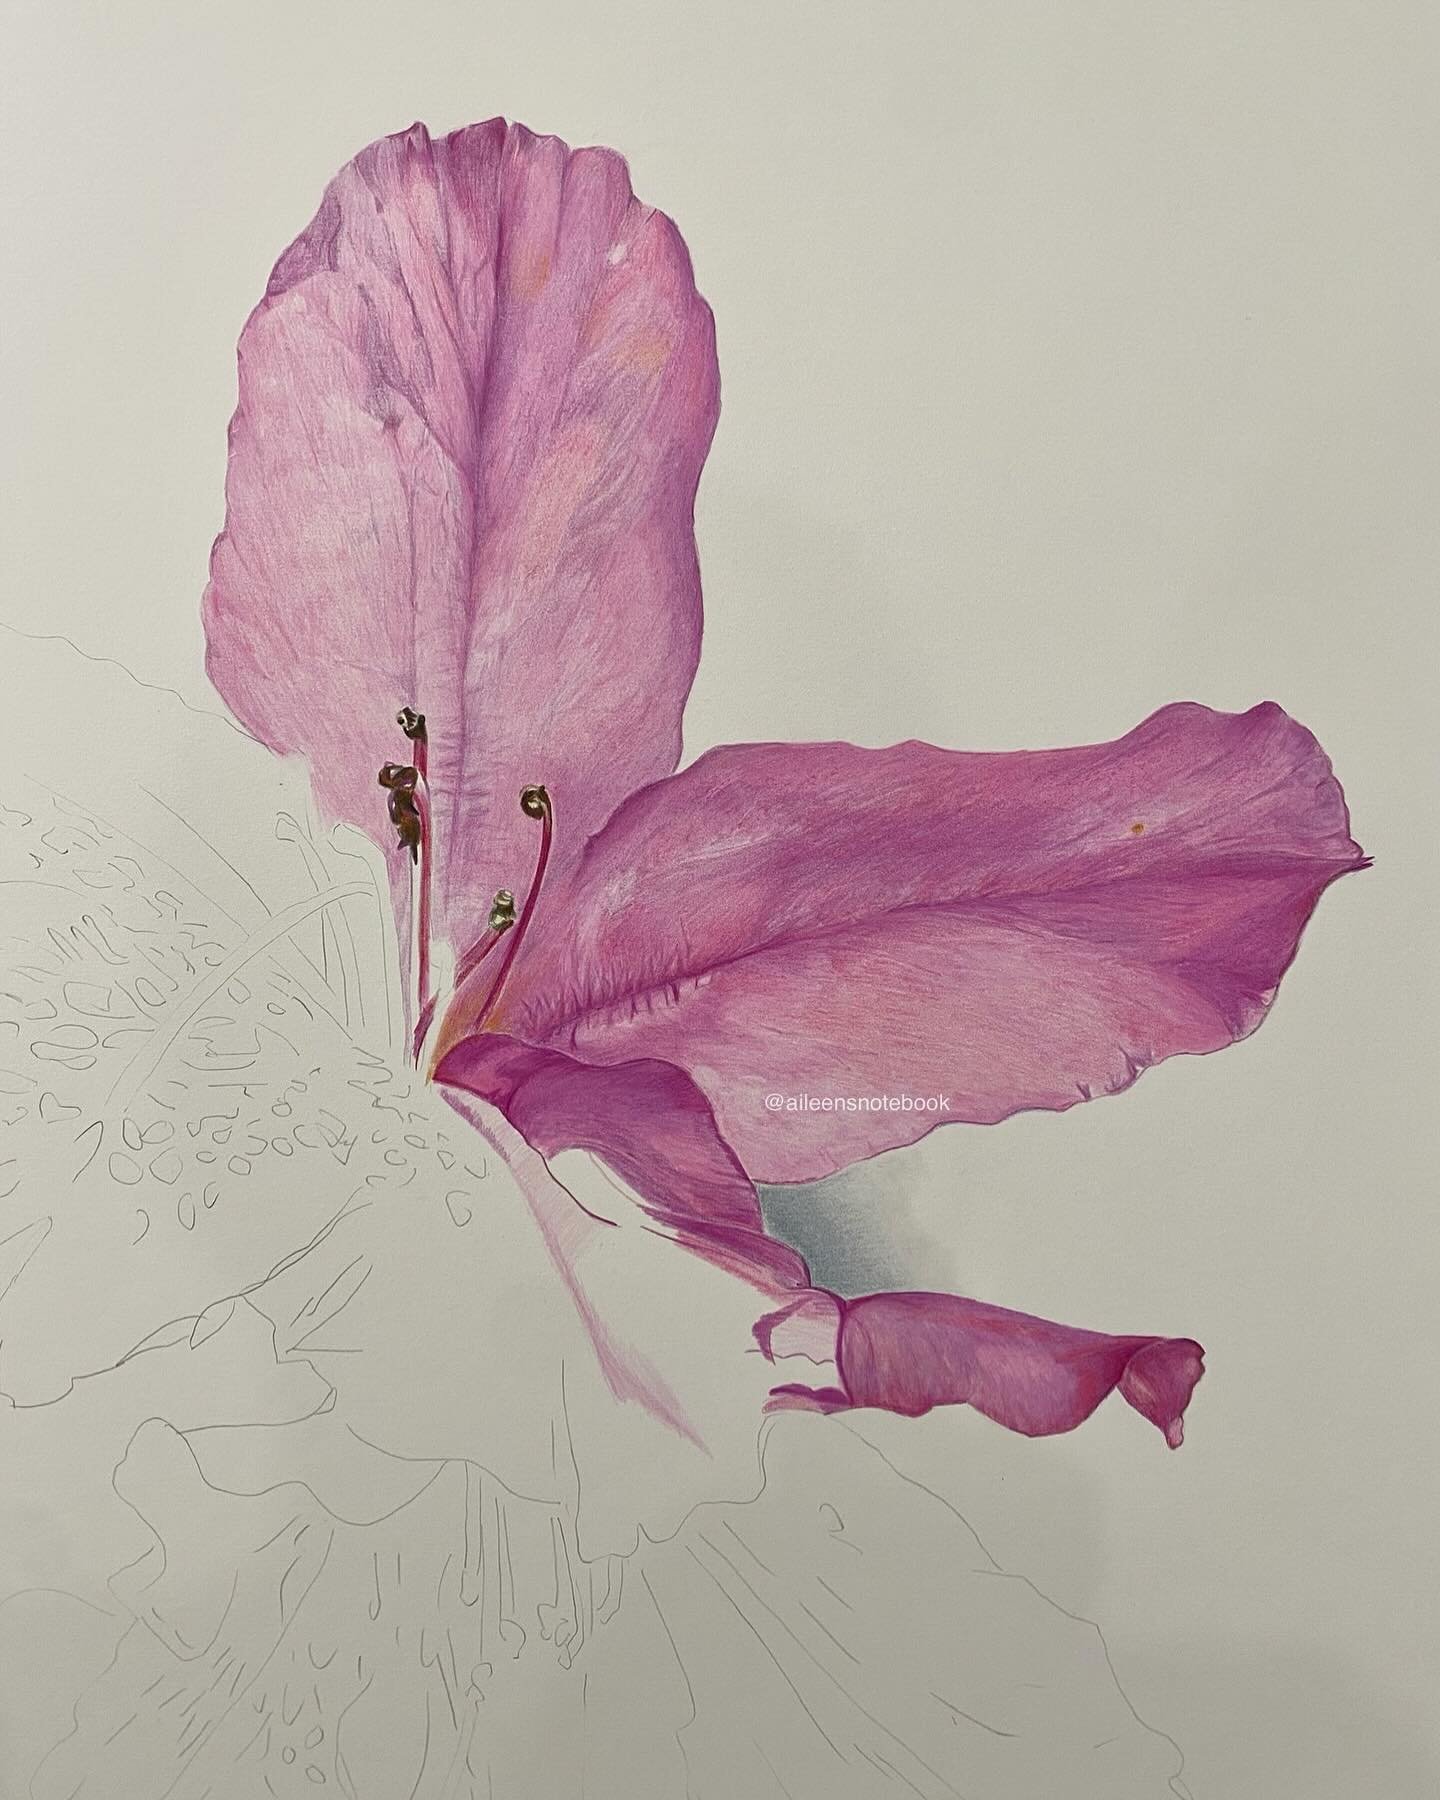 WIP An azalea bush can live for up to 50 years. The spectacular blooms are dramatic but gone in a few weeks. I may spend longer drawing this one than it was alive. #azalea #illustration #coloredpencil #botanicalart #realism #louisiana